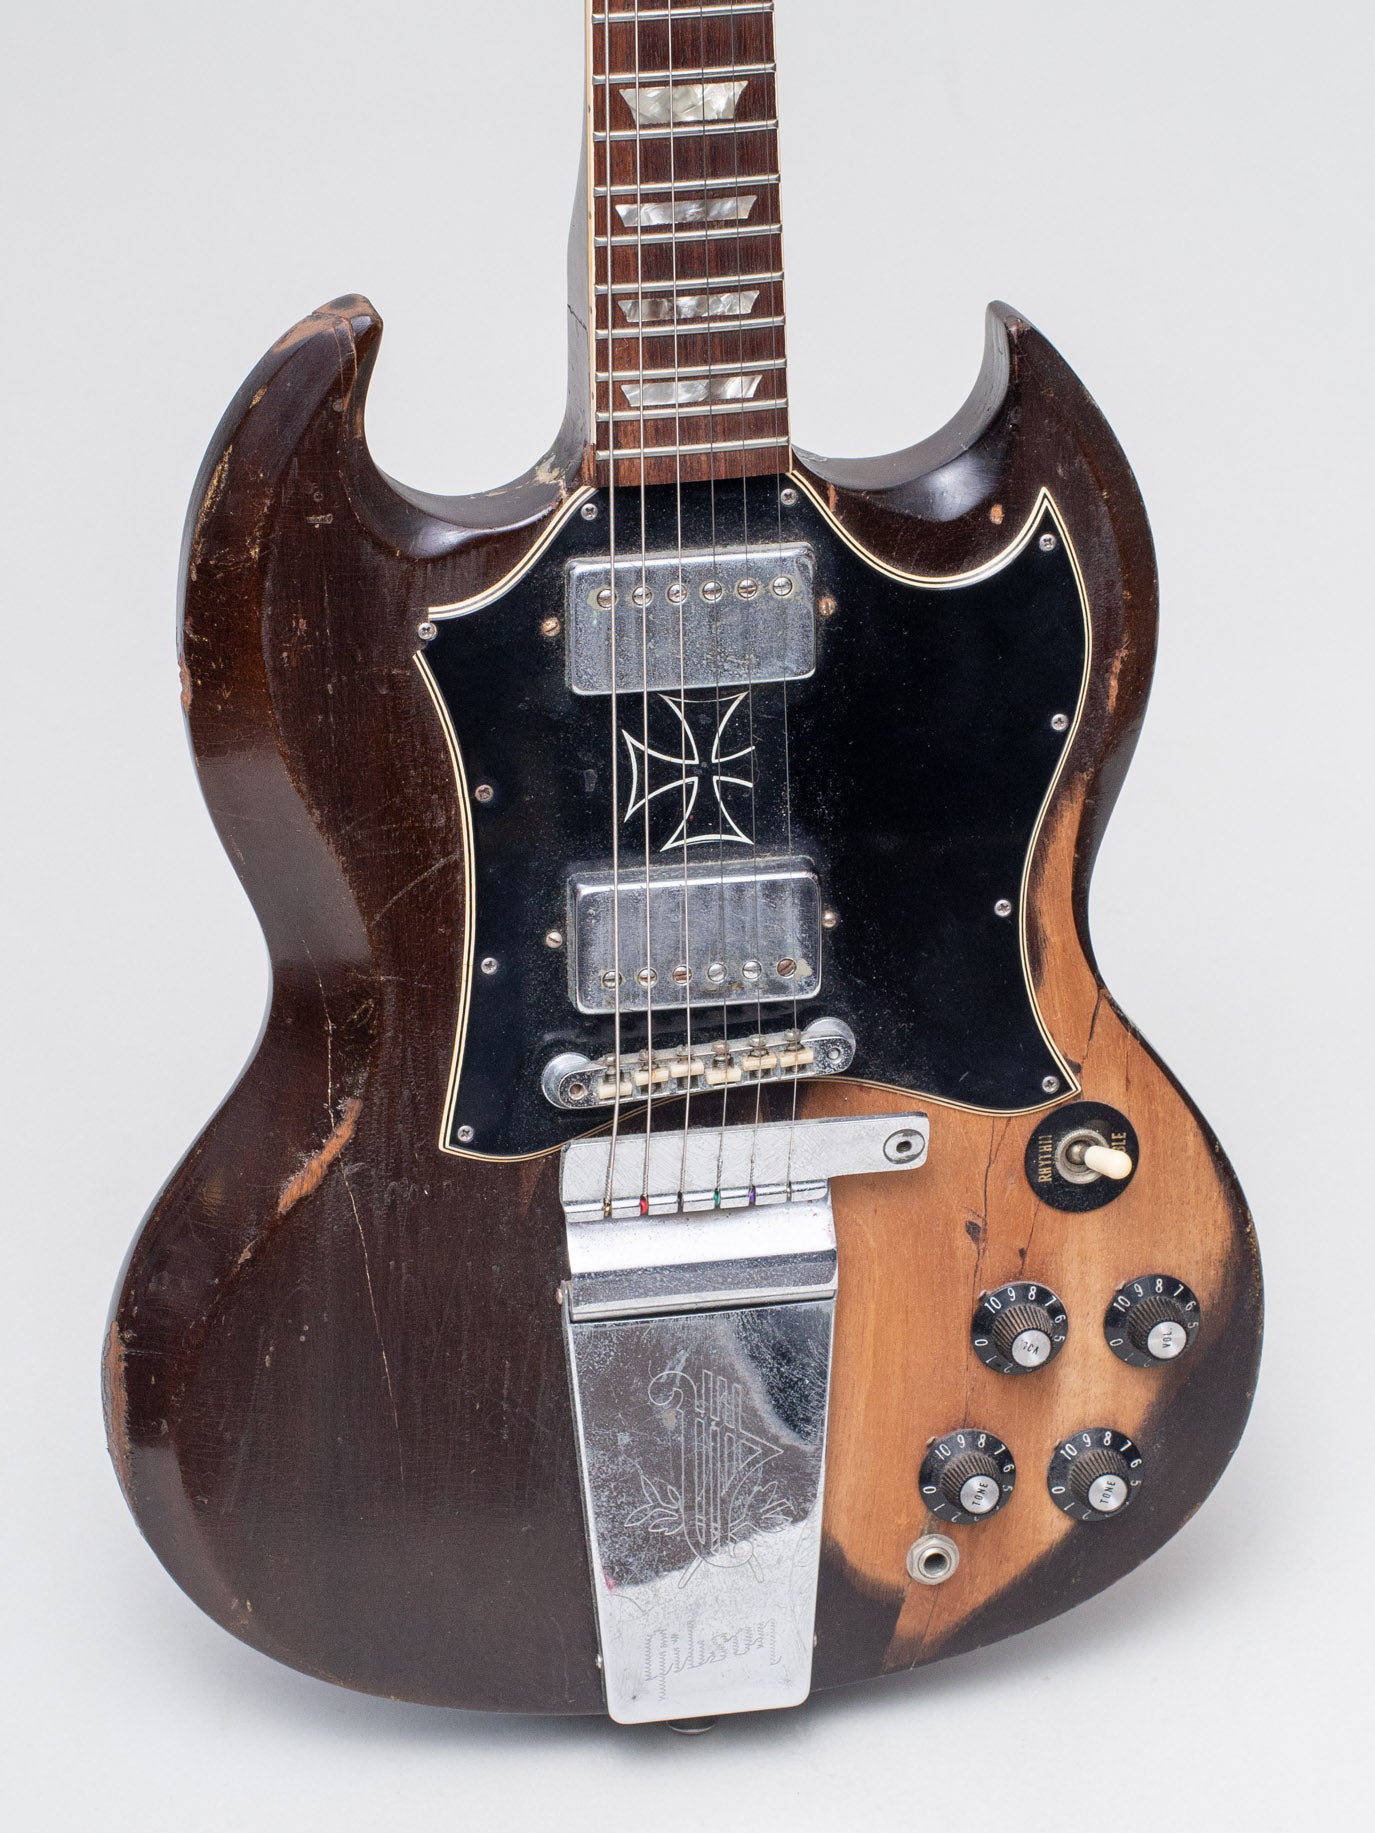 1967 Gibson SG Standard Previously Owned by Jesse Malin